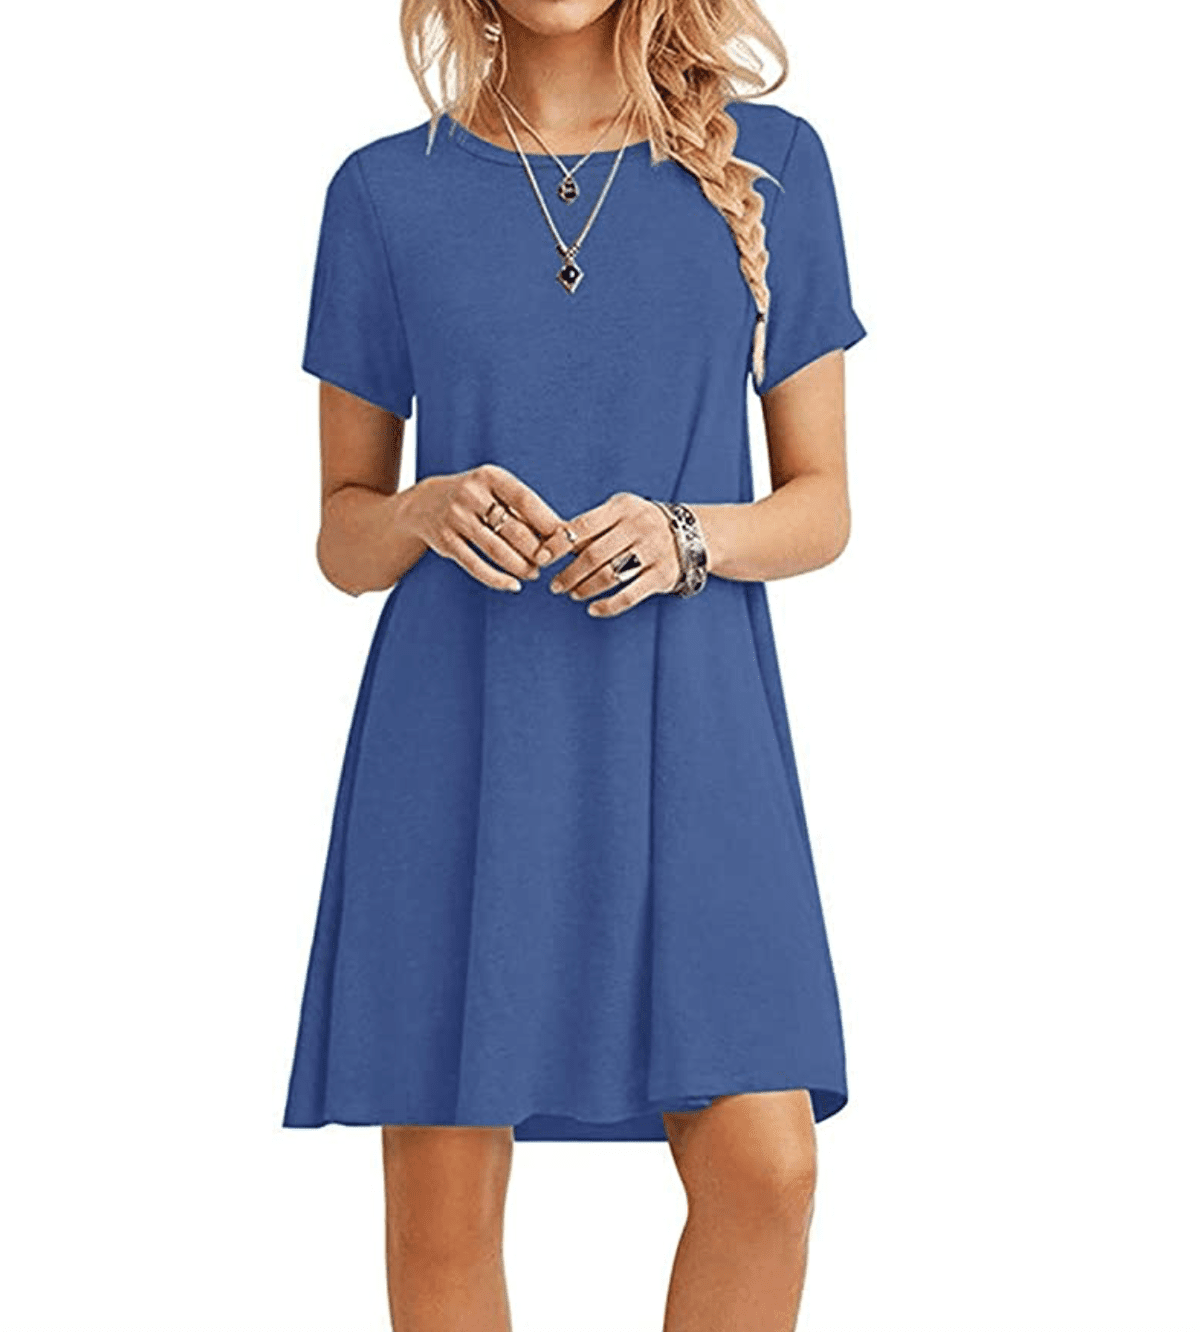 This $27 T-Shirt Dress From Amazon Has ...